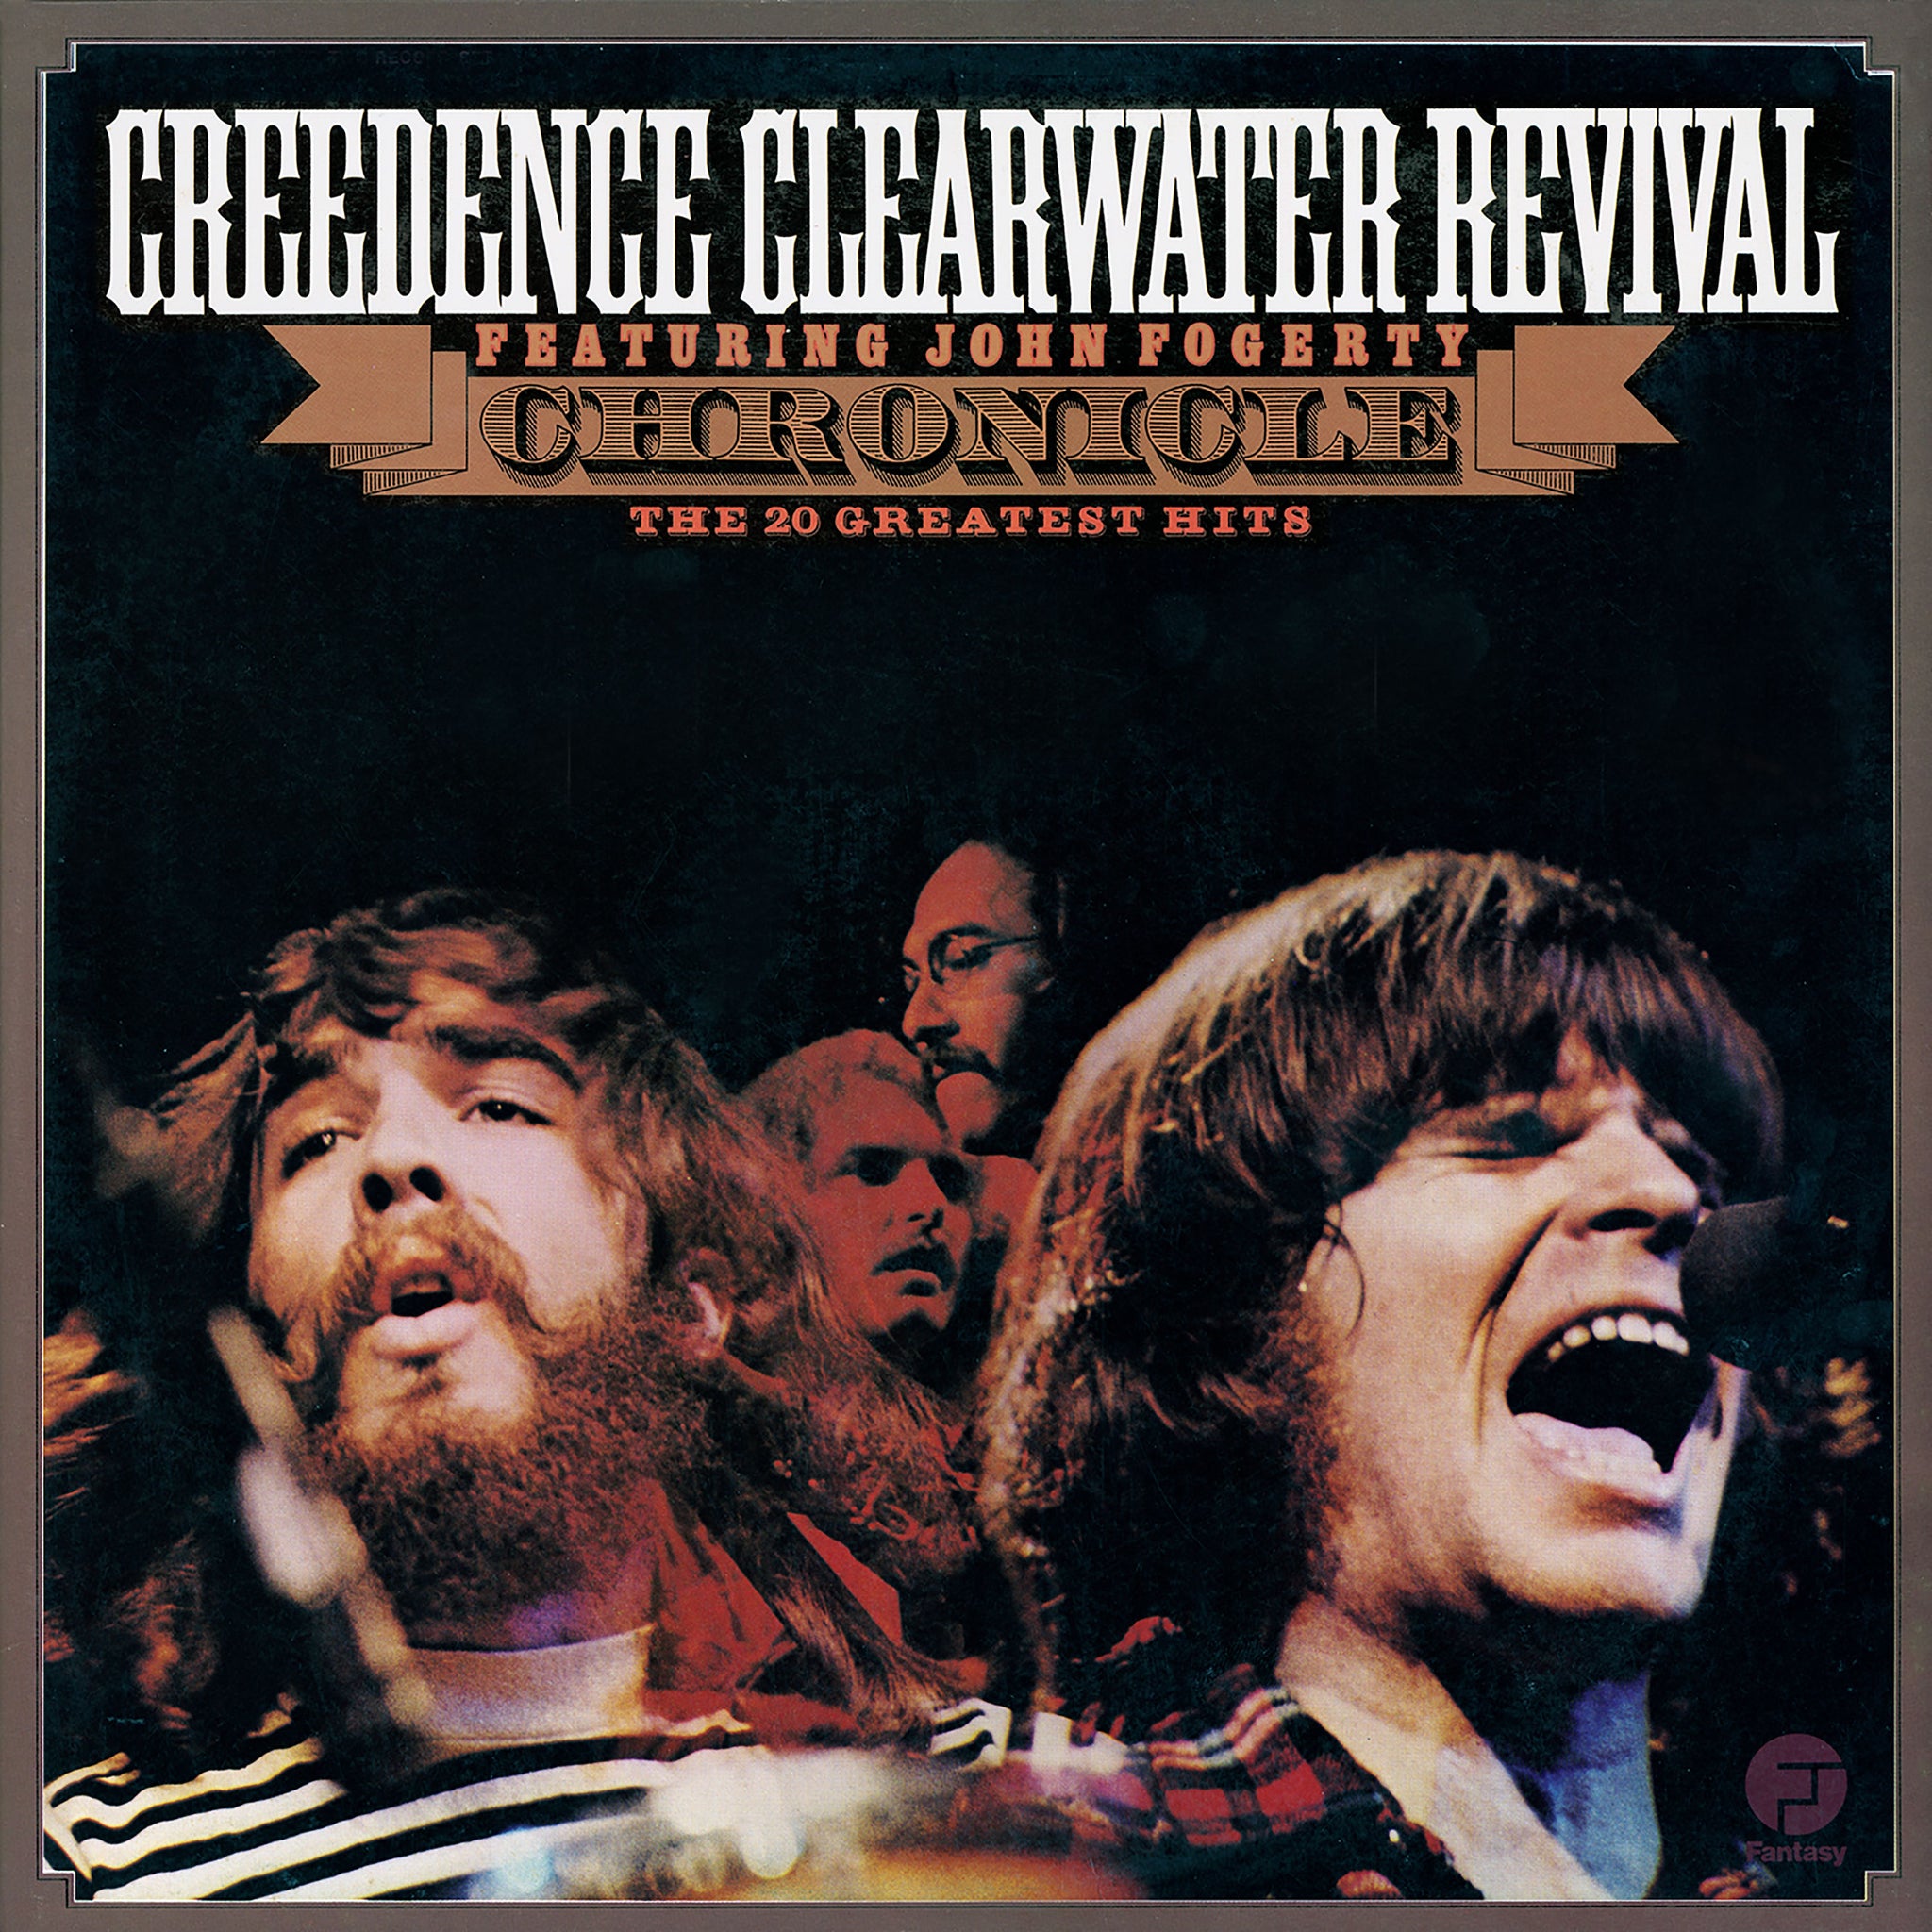 CREEDENCE CLEARWATER REVIVAL - CHRONICLE THE 20 GREATEST HITS - 2LP VINYL - Wah Wah Records